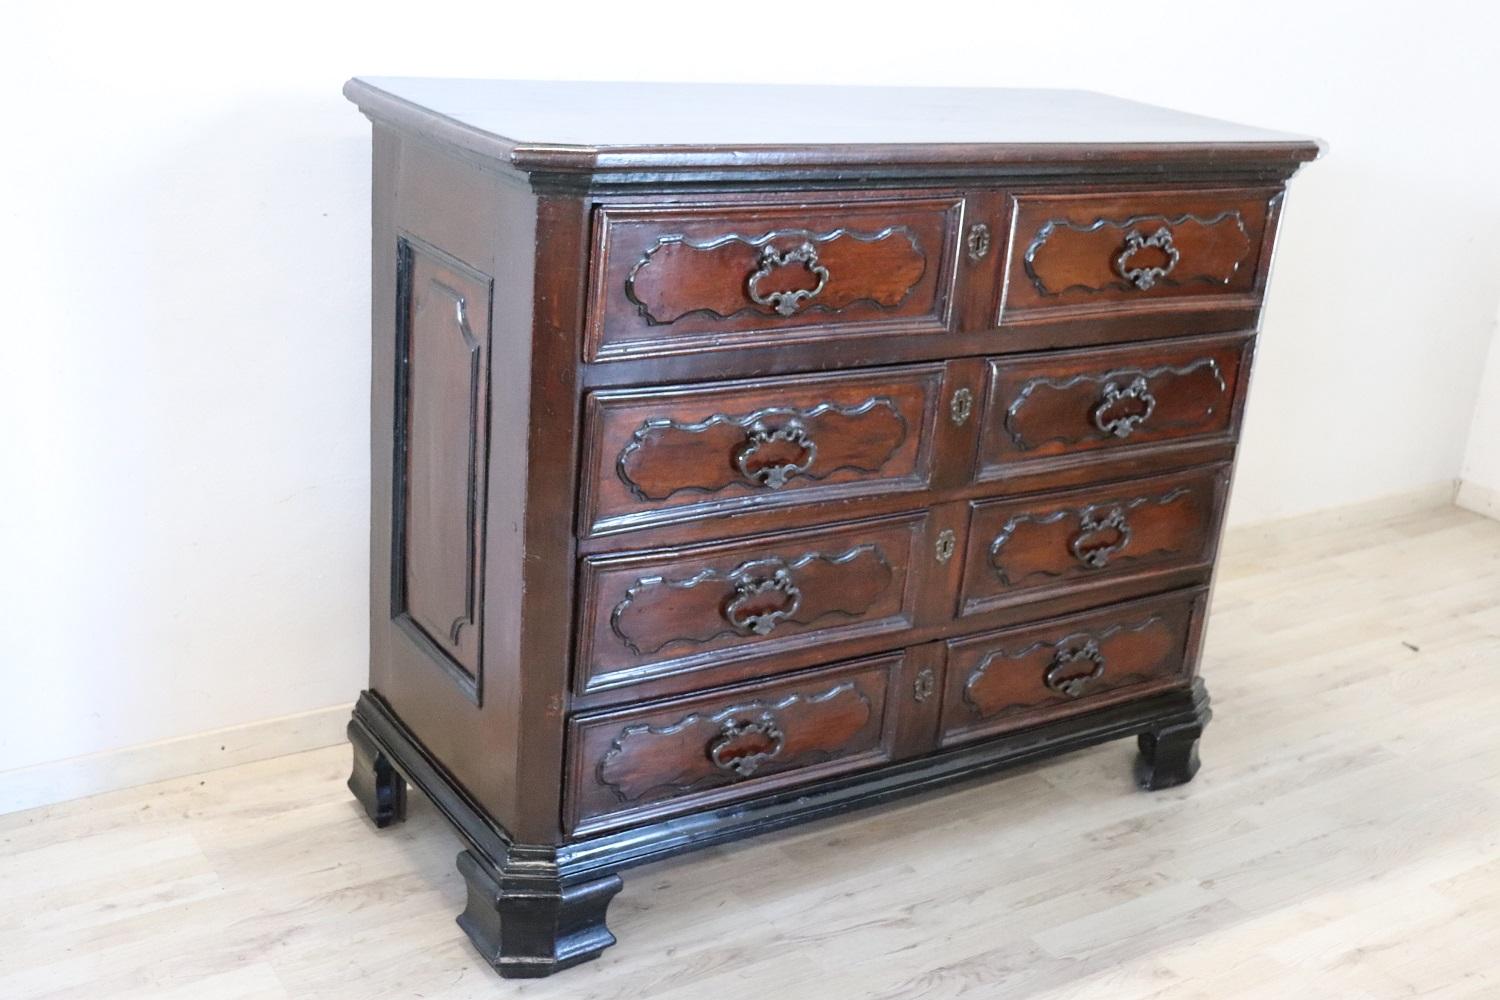 Important and rare antique Italian of the period Louis XIV chest of drawers, 1680. On the front four large and useful drawers. Characterized by front of the drawers with relief decorations hand carved in solid walnut wood. High quality cabinetry